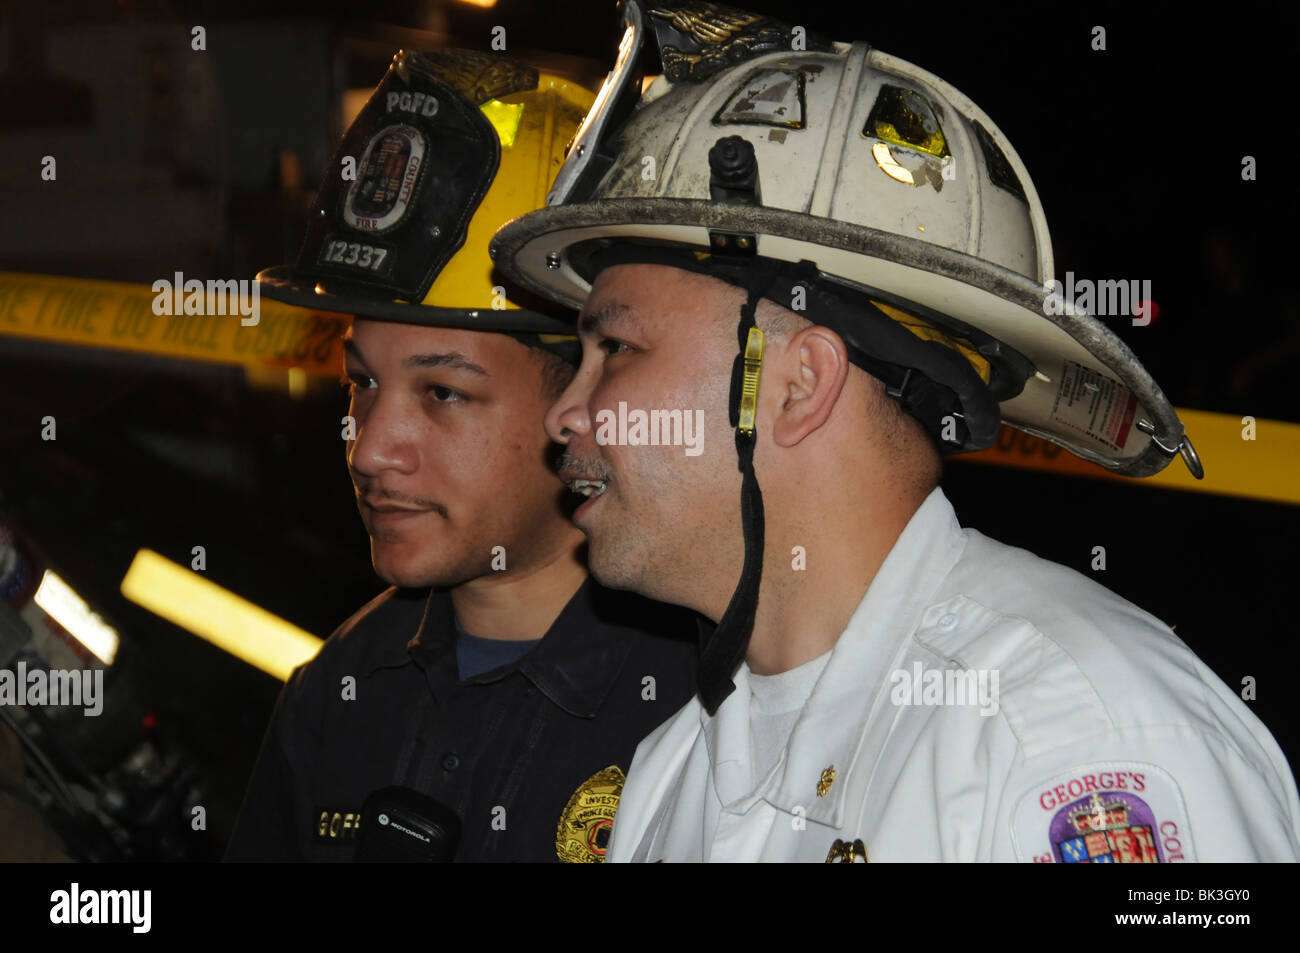 A fire chief discusses firefighting strategy and tactics at a 3 alarm fire in Greenbelt, Maryland Stock Photo